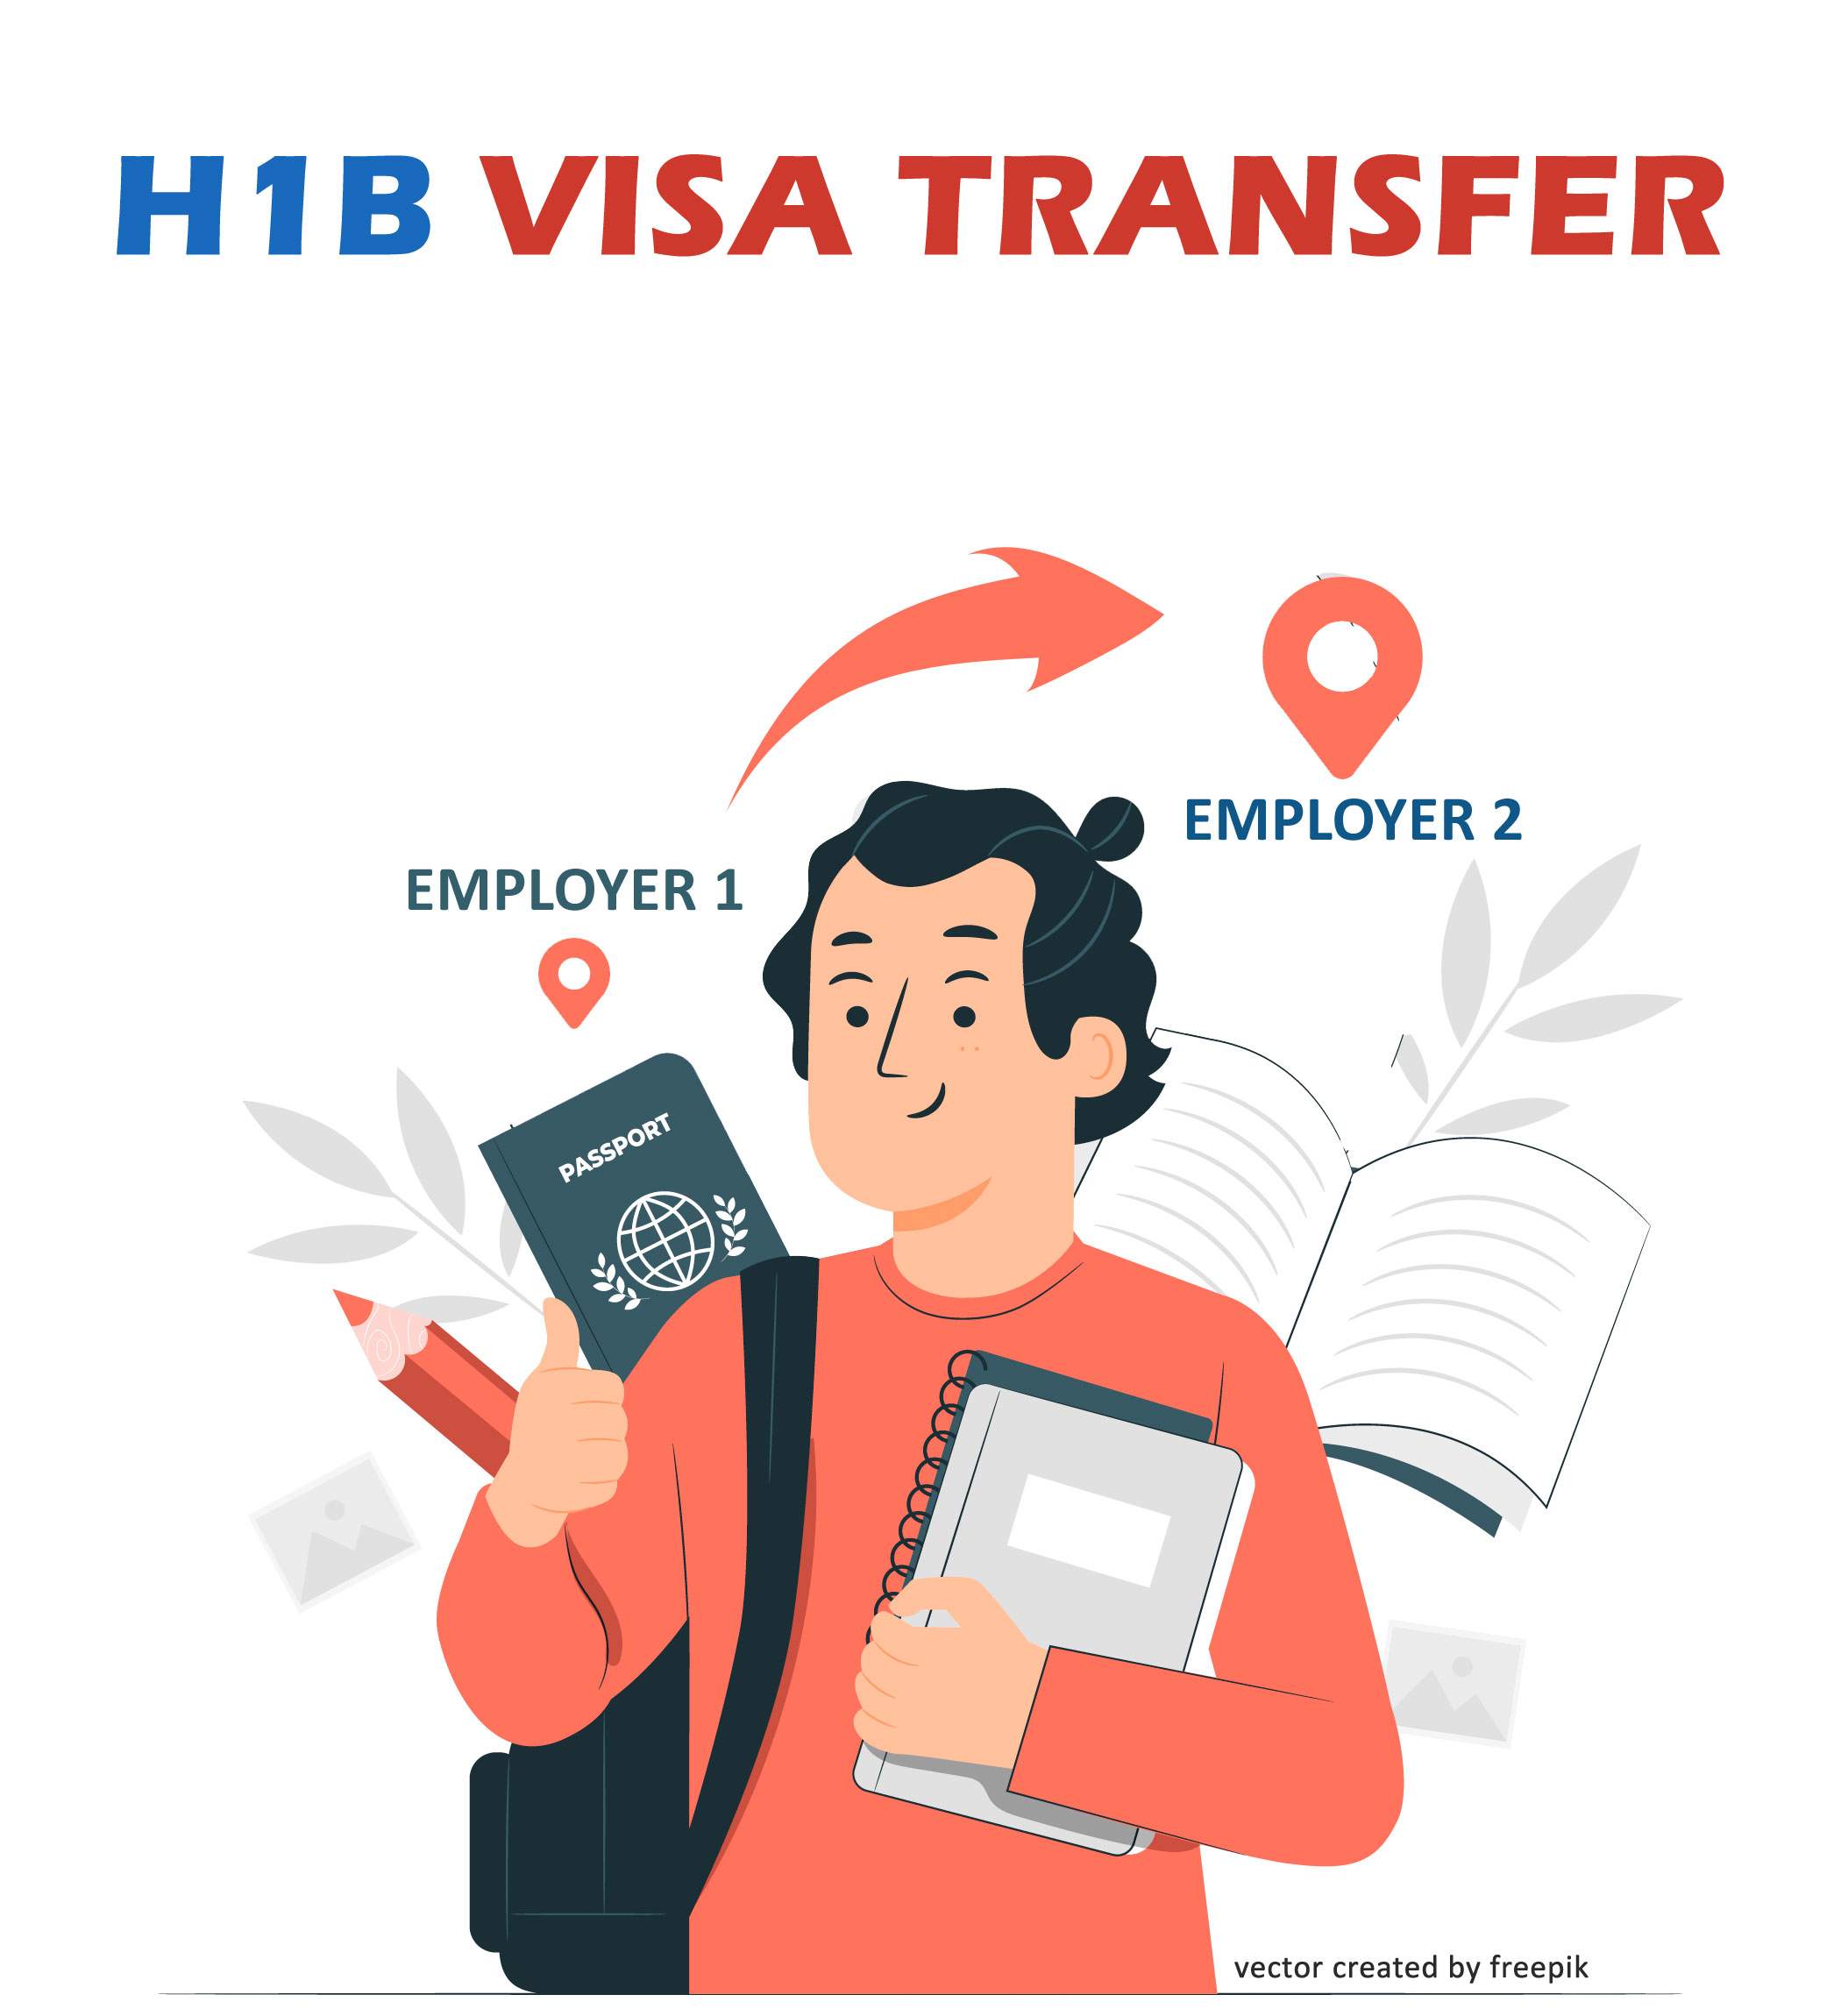 CONNECT WITH US FOR H1 TRANSFER TOWARDS A SAFEST HANDS